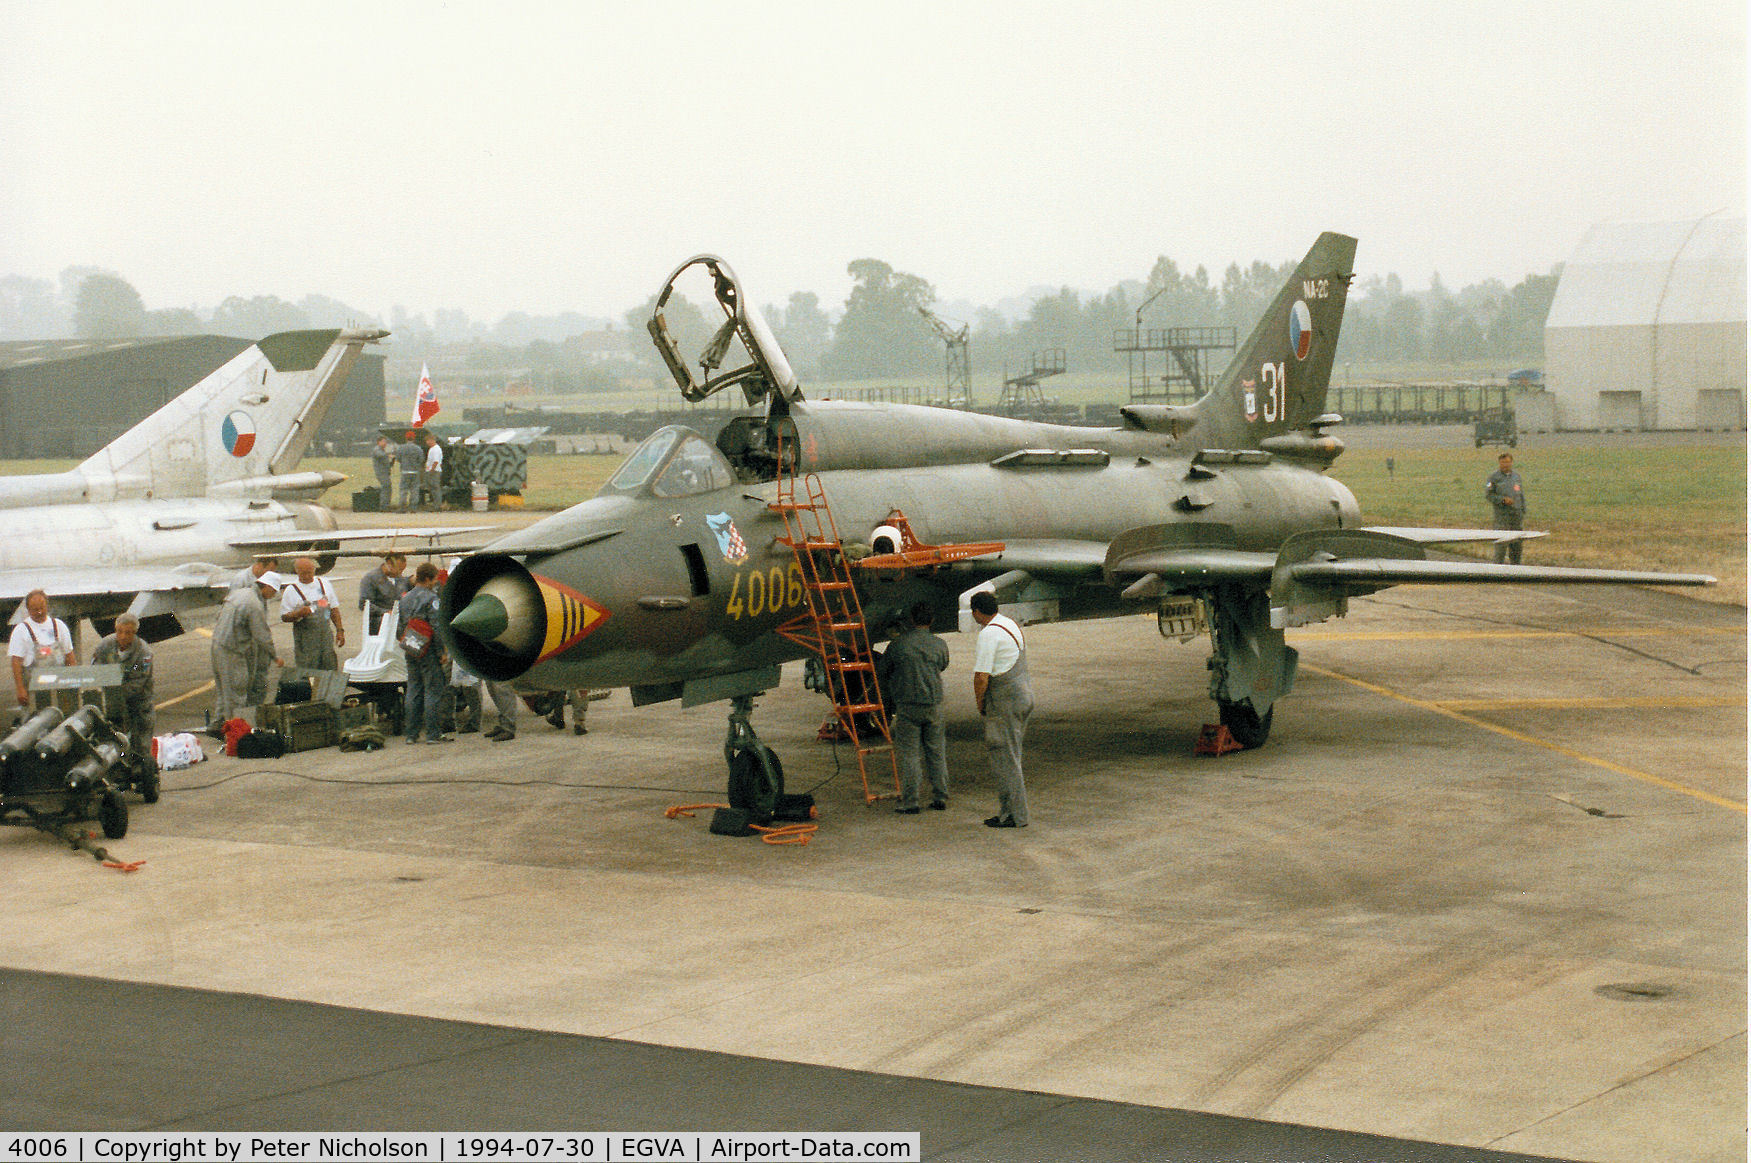 4006, 1989 Sukhoi Su-22M-4 C/N 40306, SU-22M-4 Fitter of 32 ZTL Czech Air Force on the flight-line at the 1994 Intnl Air Tattoo at RAF Fairford.